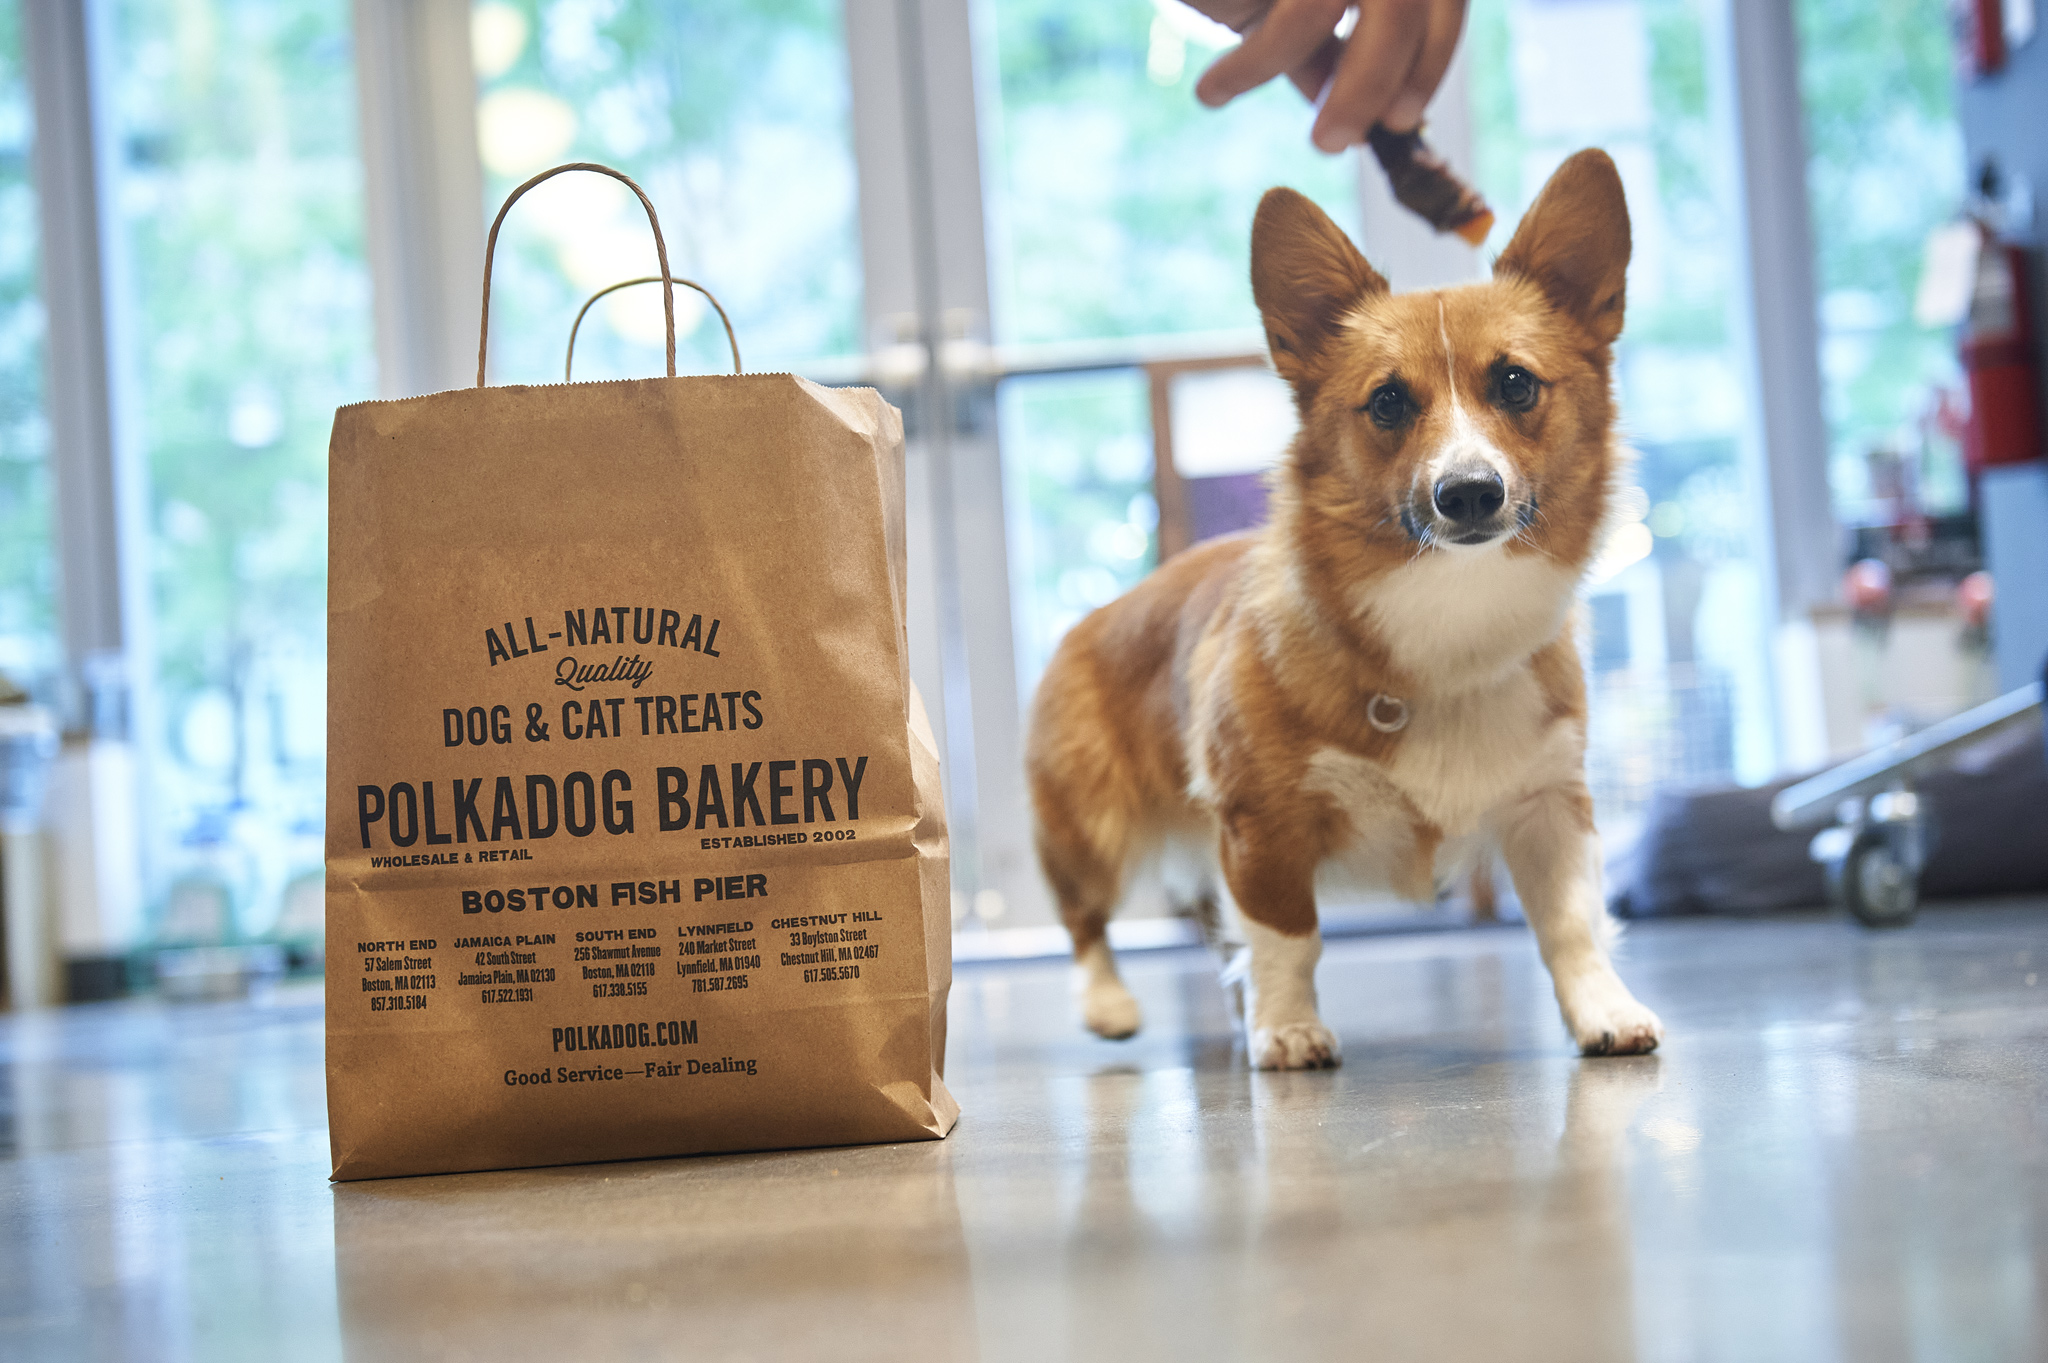 Ma & Paws Bakery Gives Up the Goods